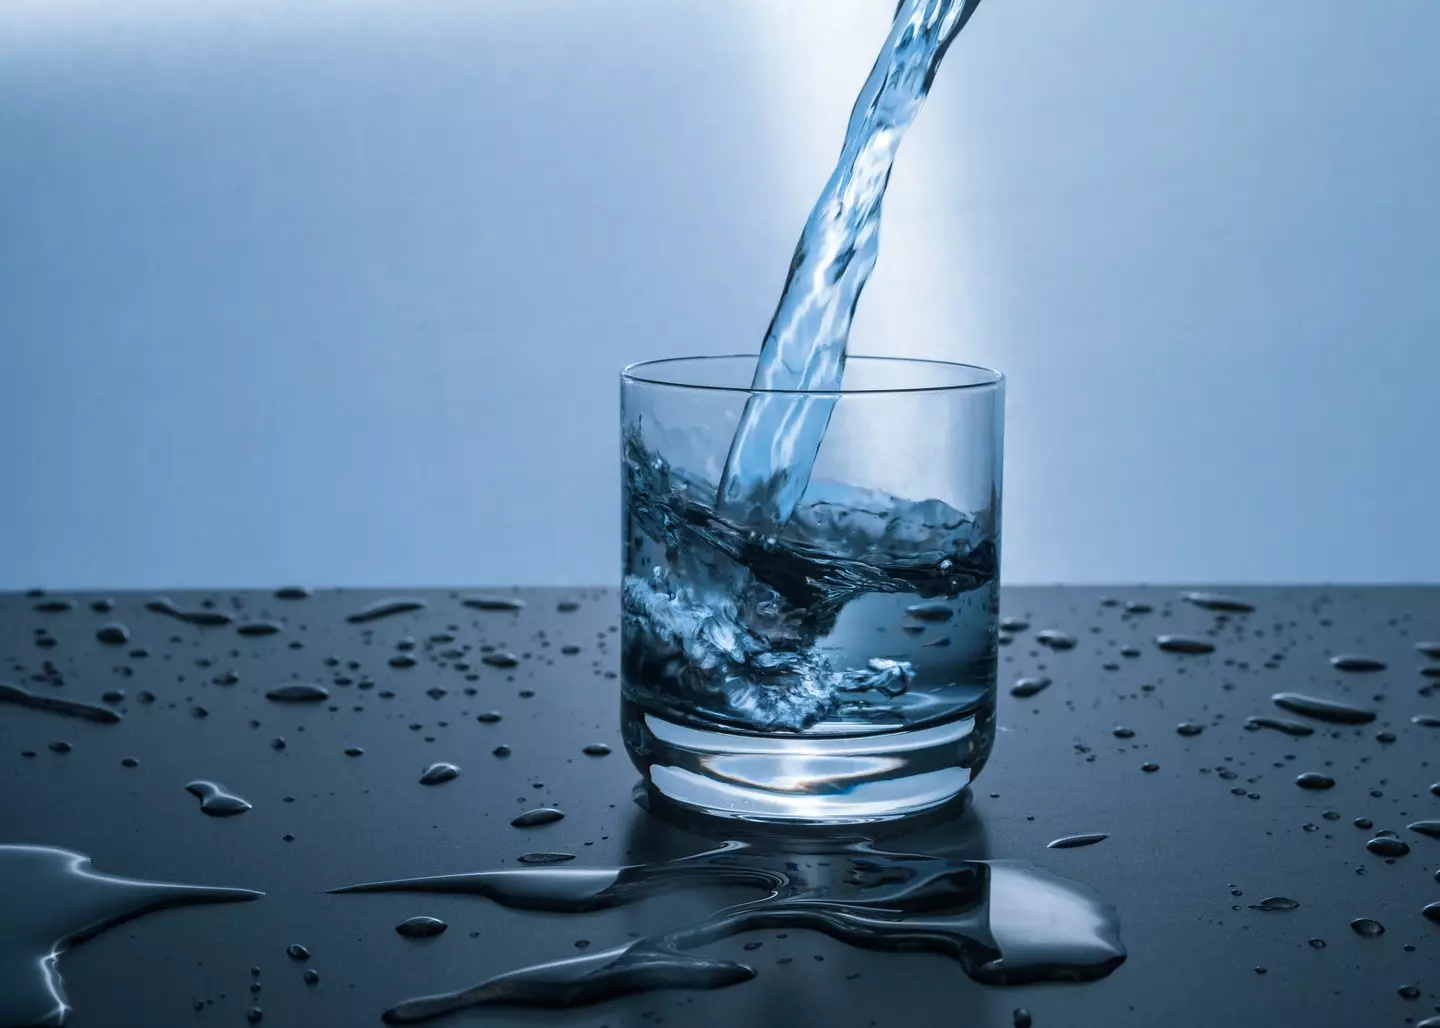 Drinking too much water can be dangerous as it diminishes the electrolytes in your blood.